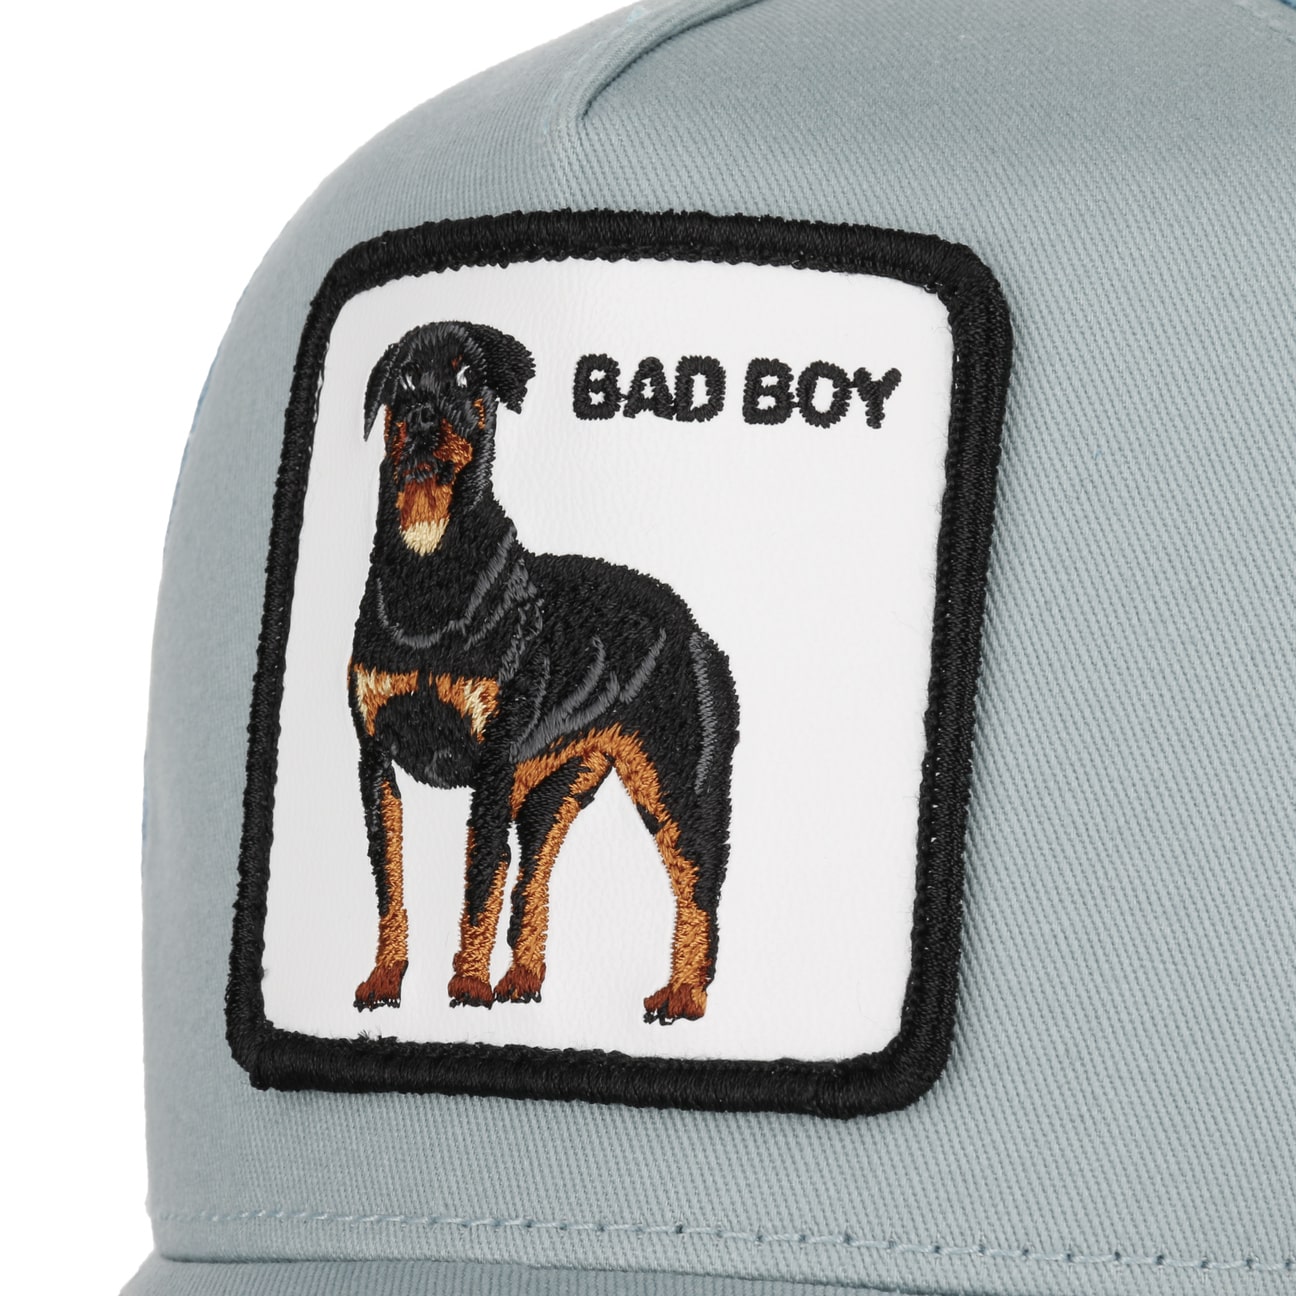 Goorin Brothers - Are you a bad boy or a good boy?